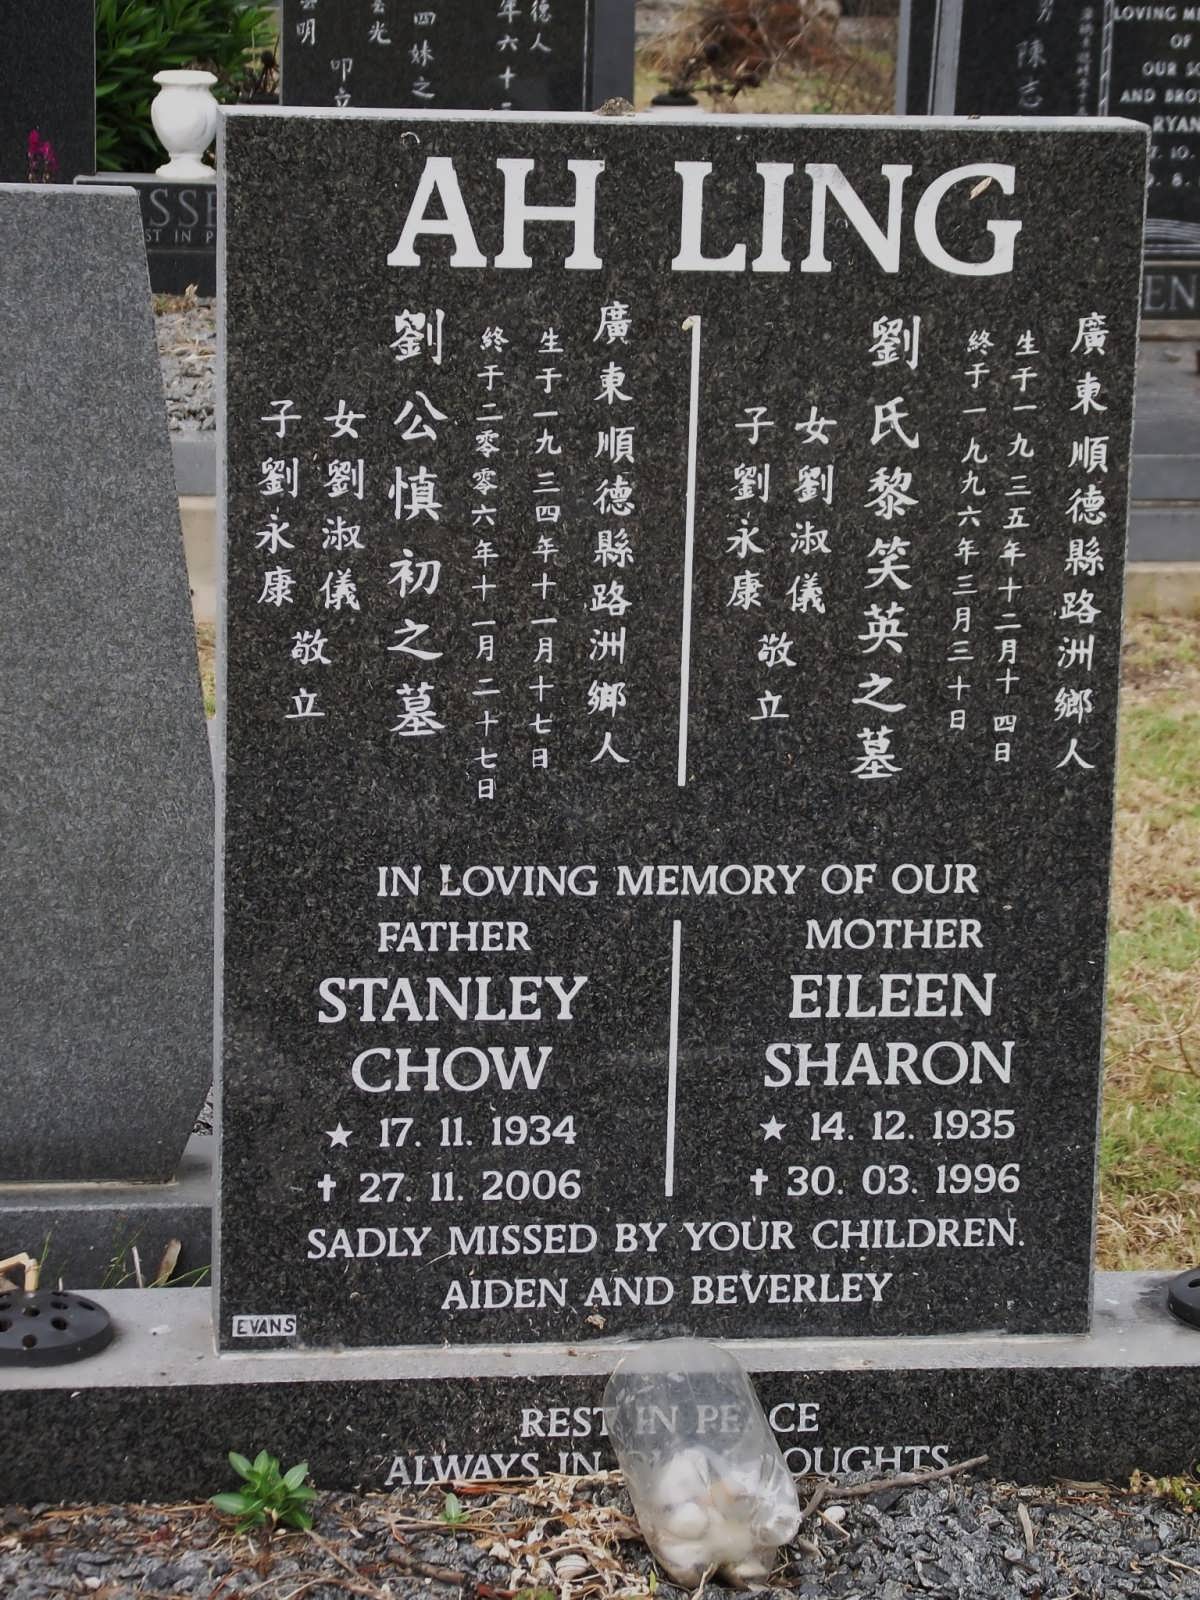 AH LING Stanley Chow 1934-2006 & Eileen Sharon 1935-1996